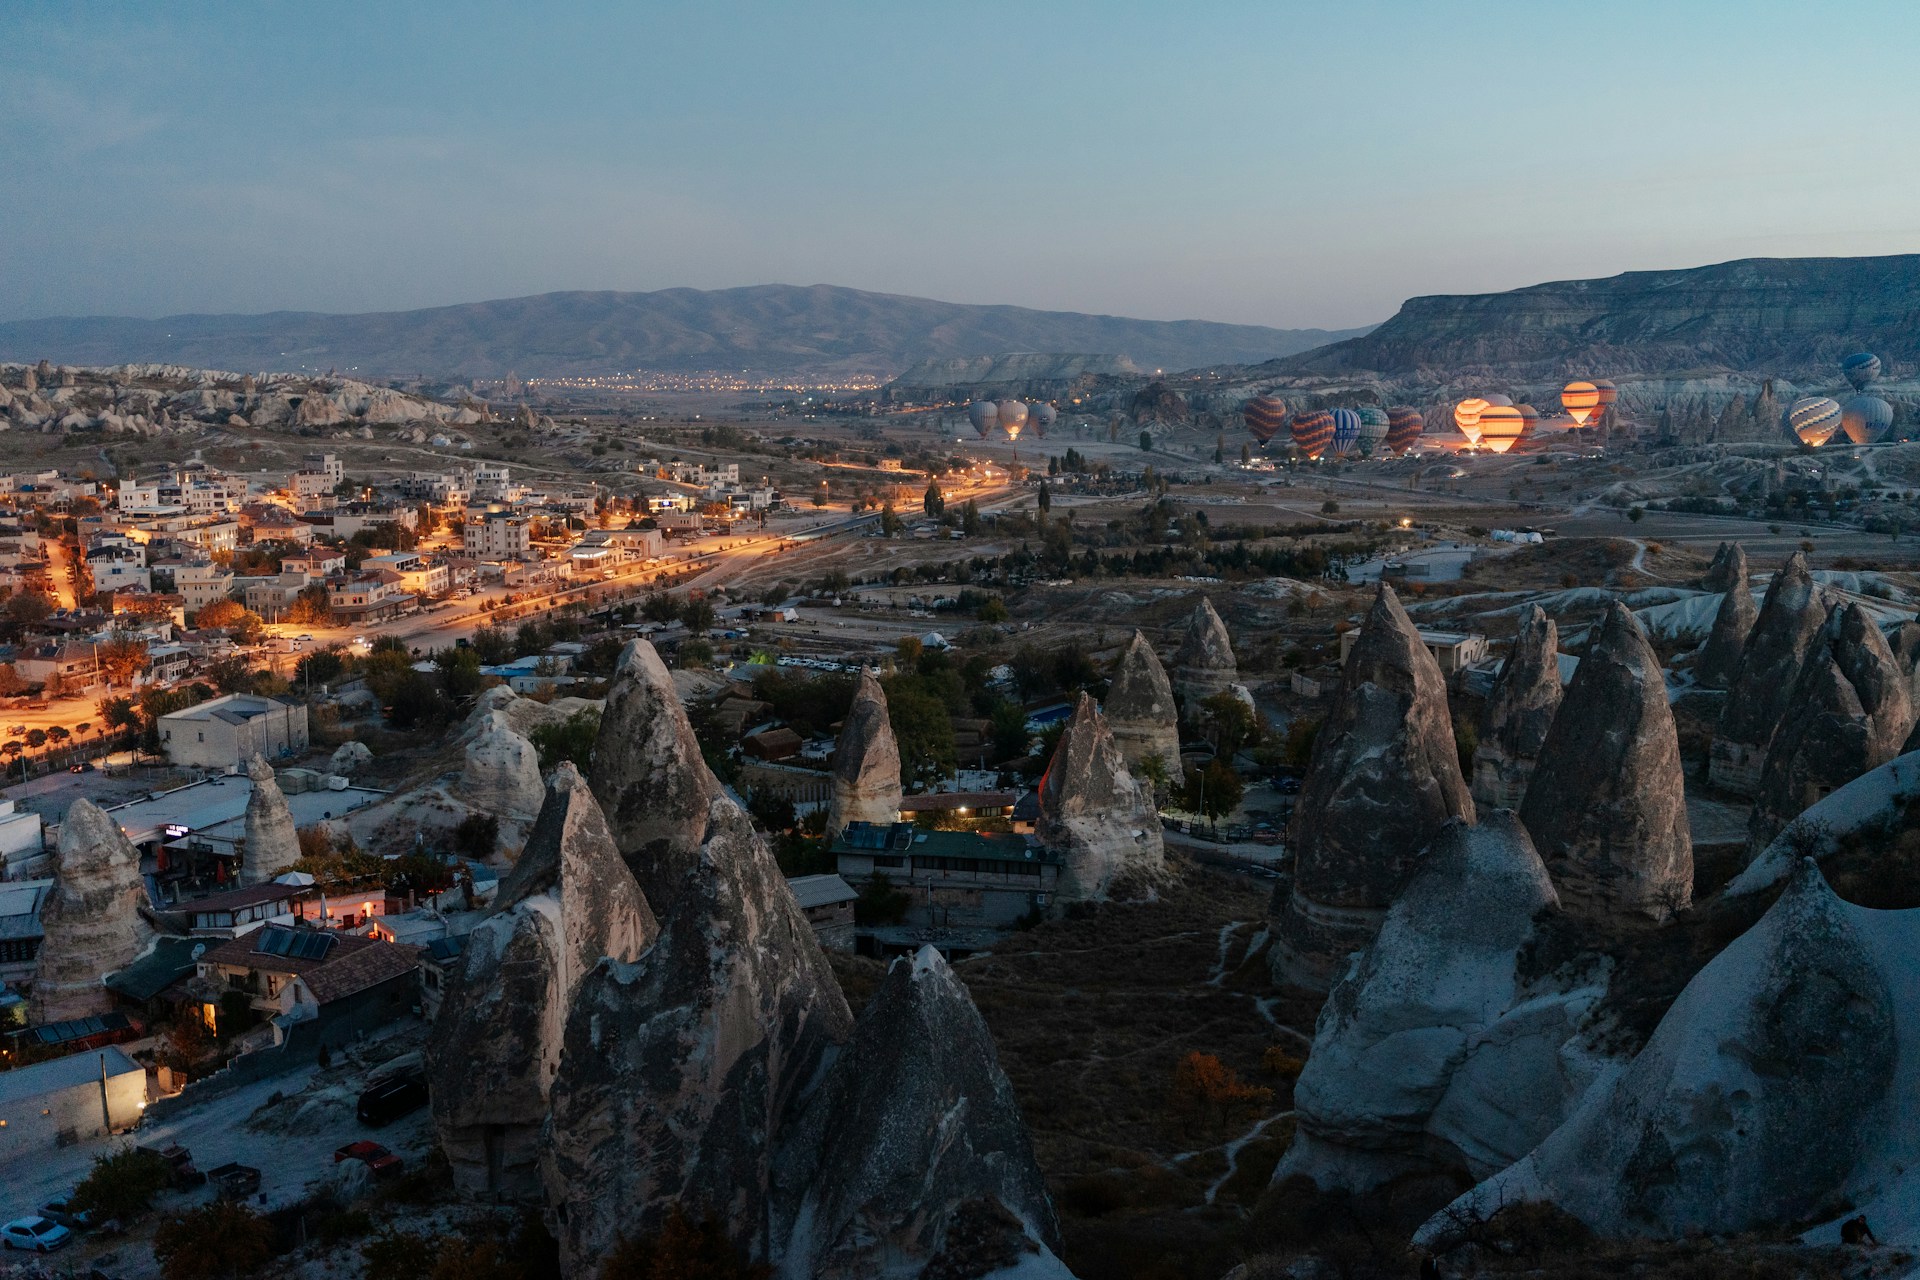 <p>In the Cappadocia region lies the Göreme National Park. It's known for some impressive, unique rock formations, ancient caves, and churches embedded in rocks. It is a great park for hiking and cave exploration.</p> <p>Picture: Igor Sporynin / Unsplash</p>